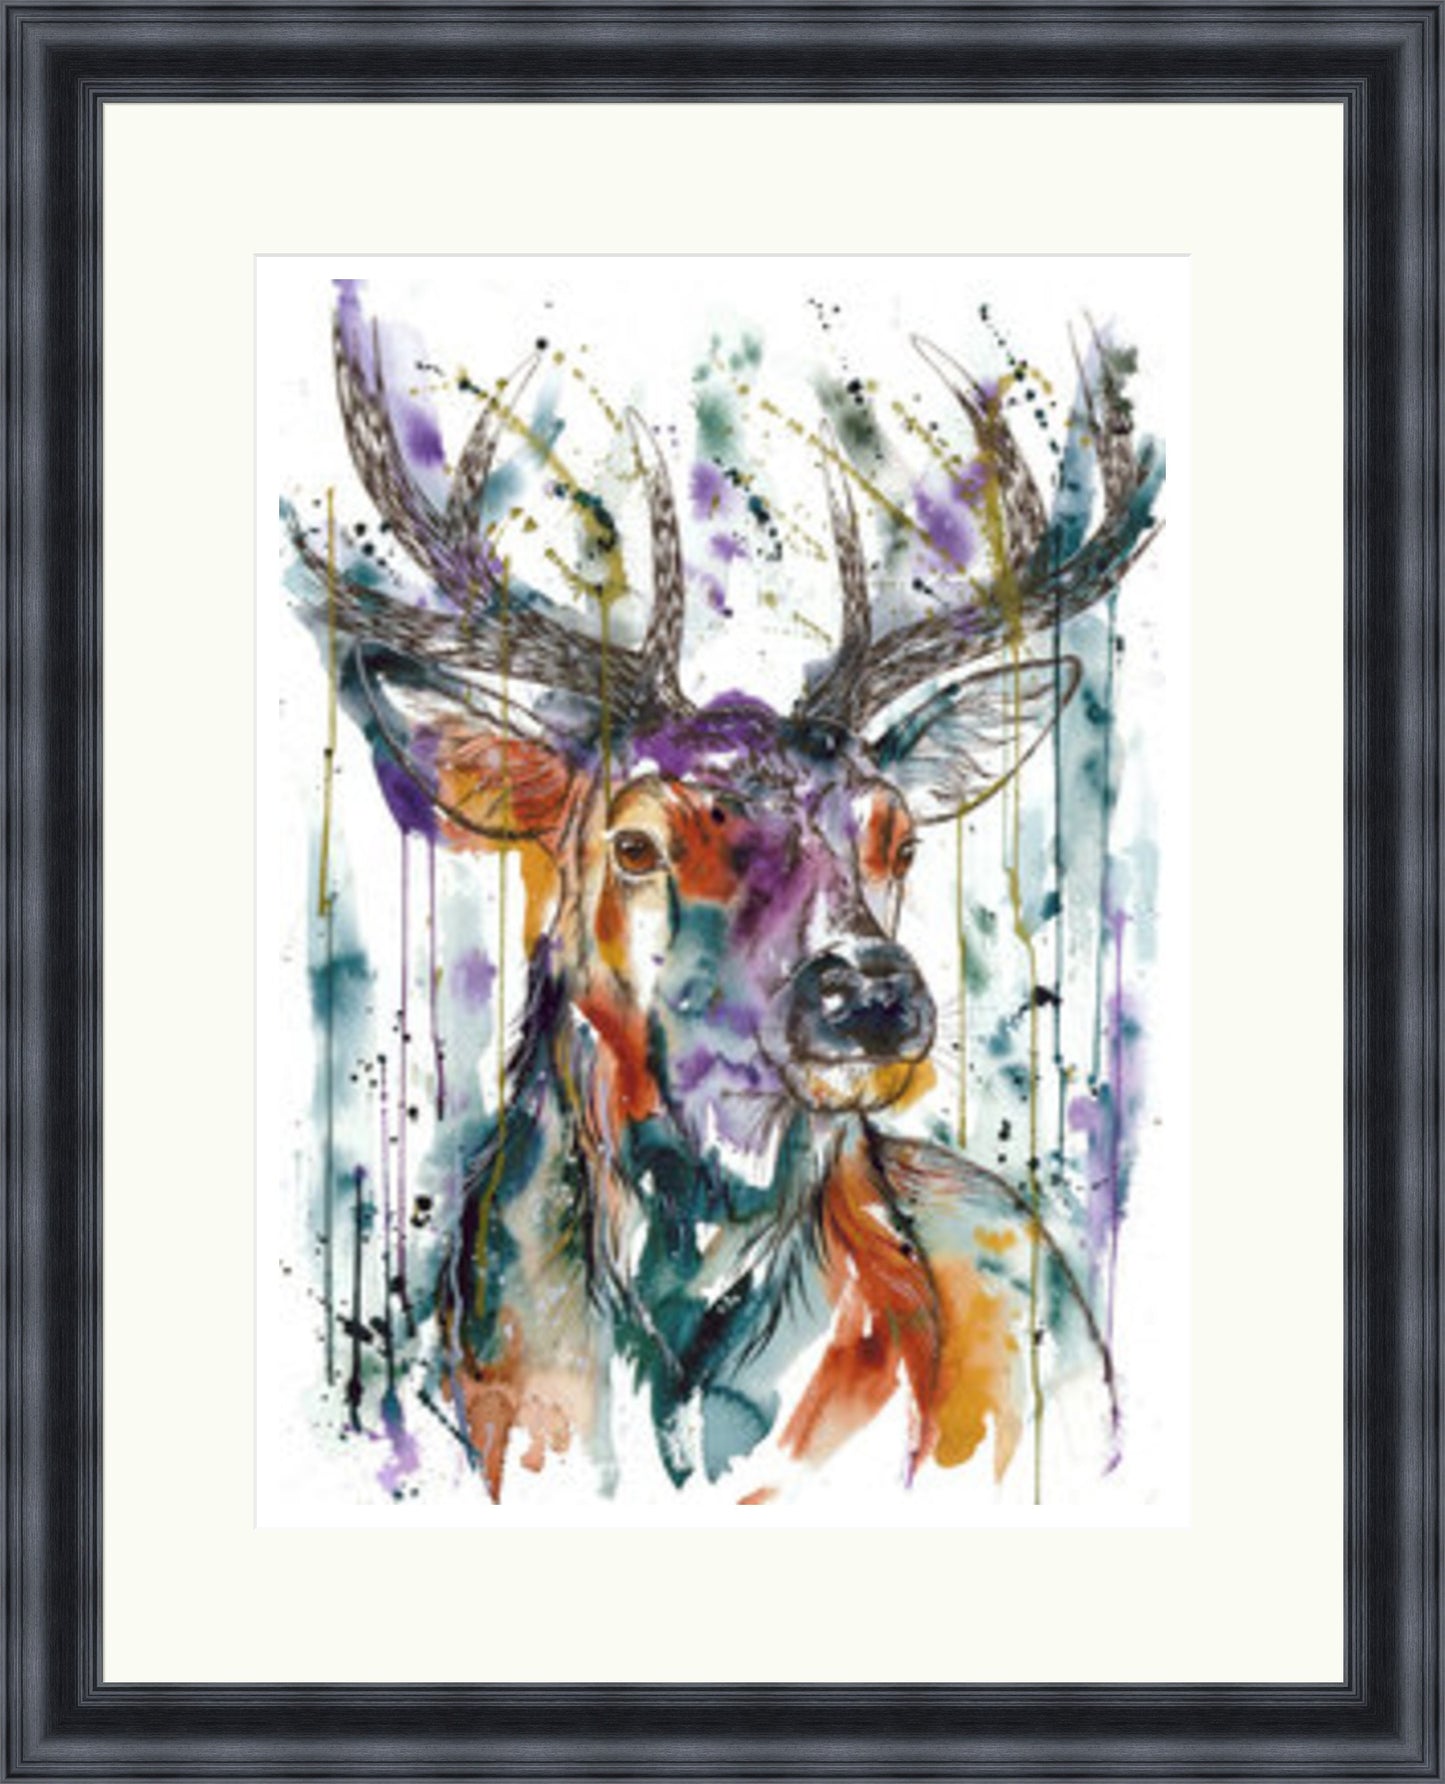 Head of the Highlands Stag Art Print by Tori Ratcliffe